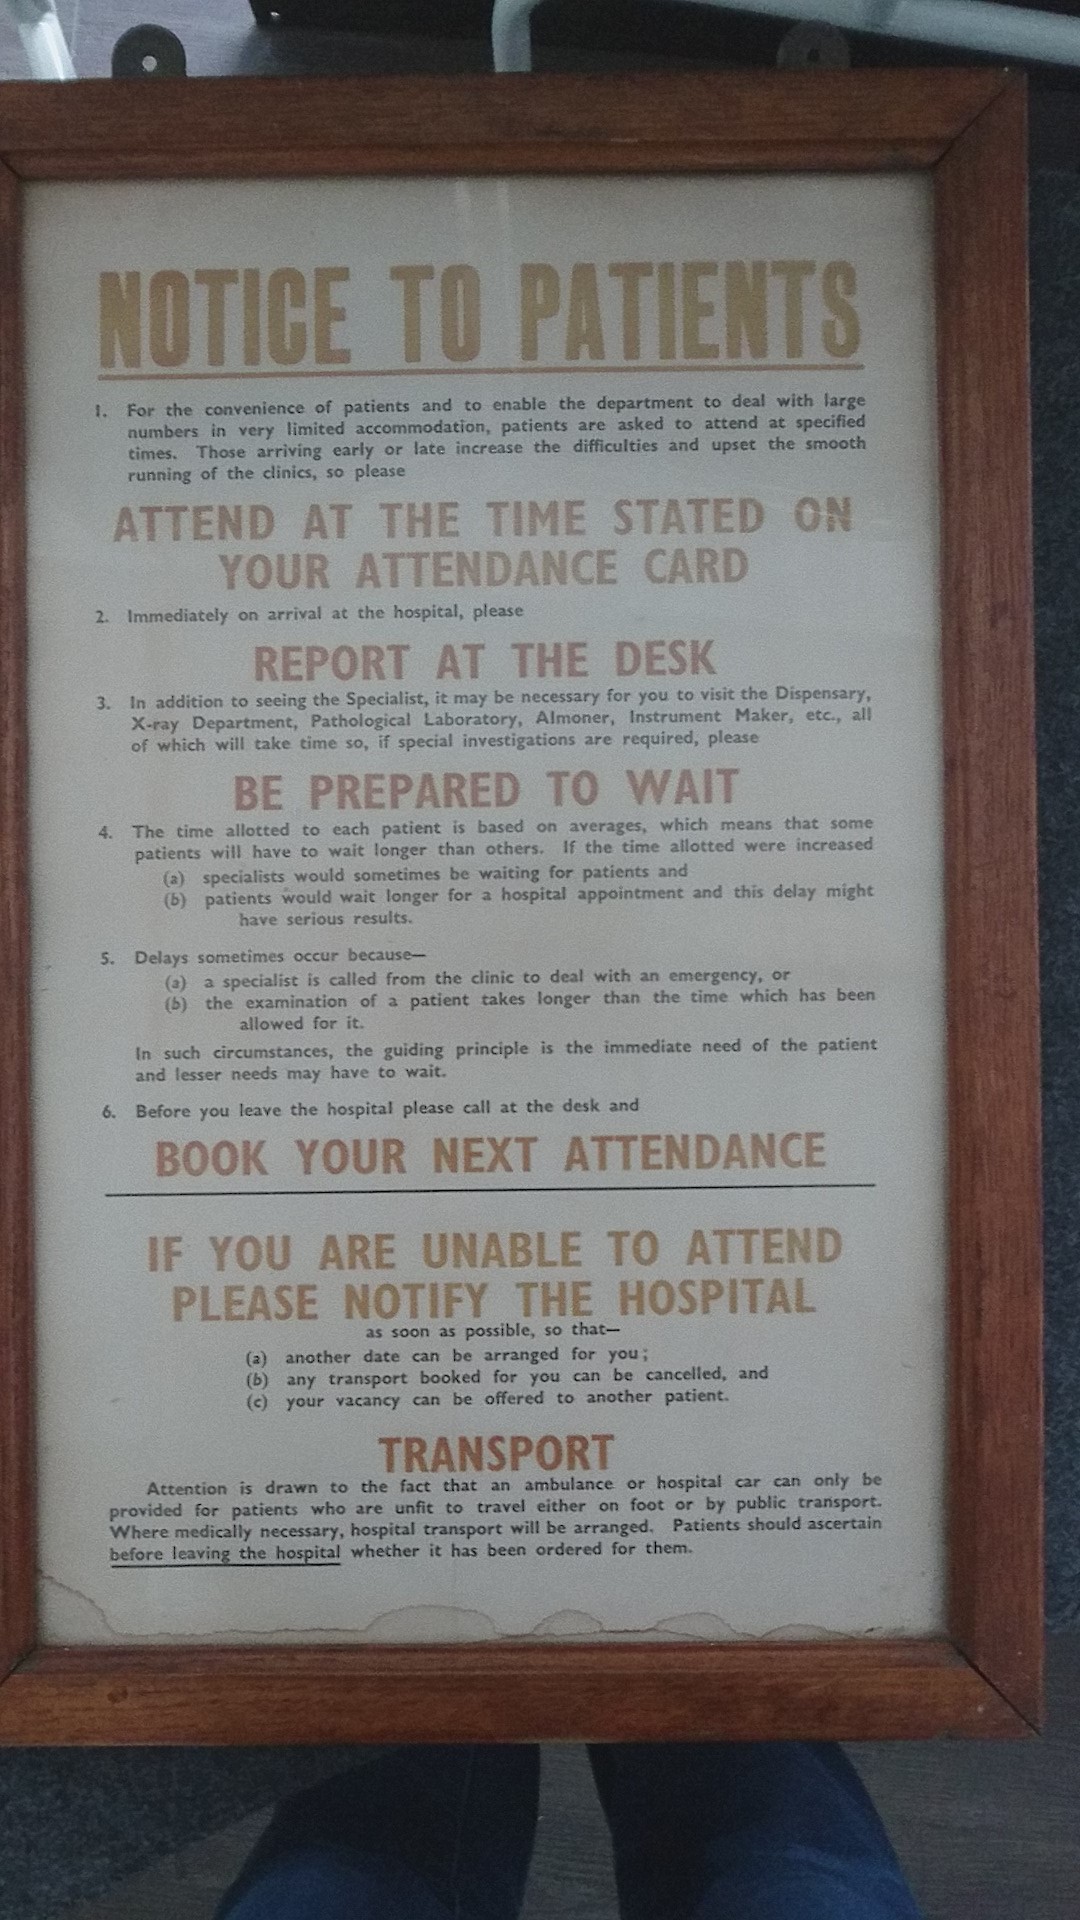 Rules for patients from 70 years ago!